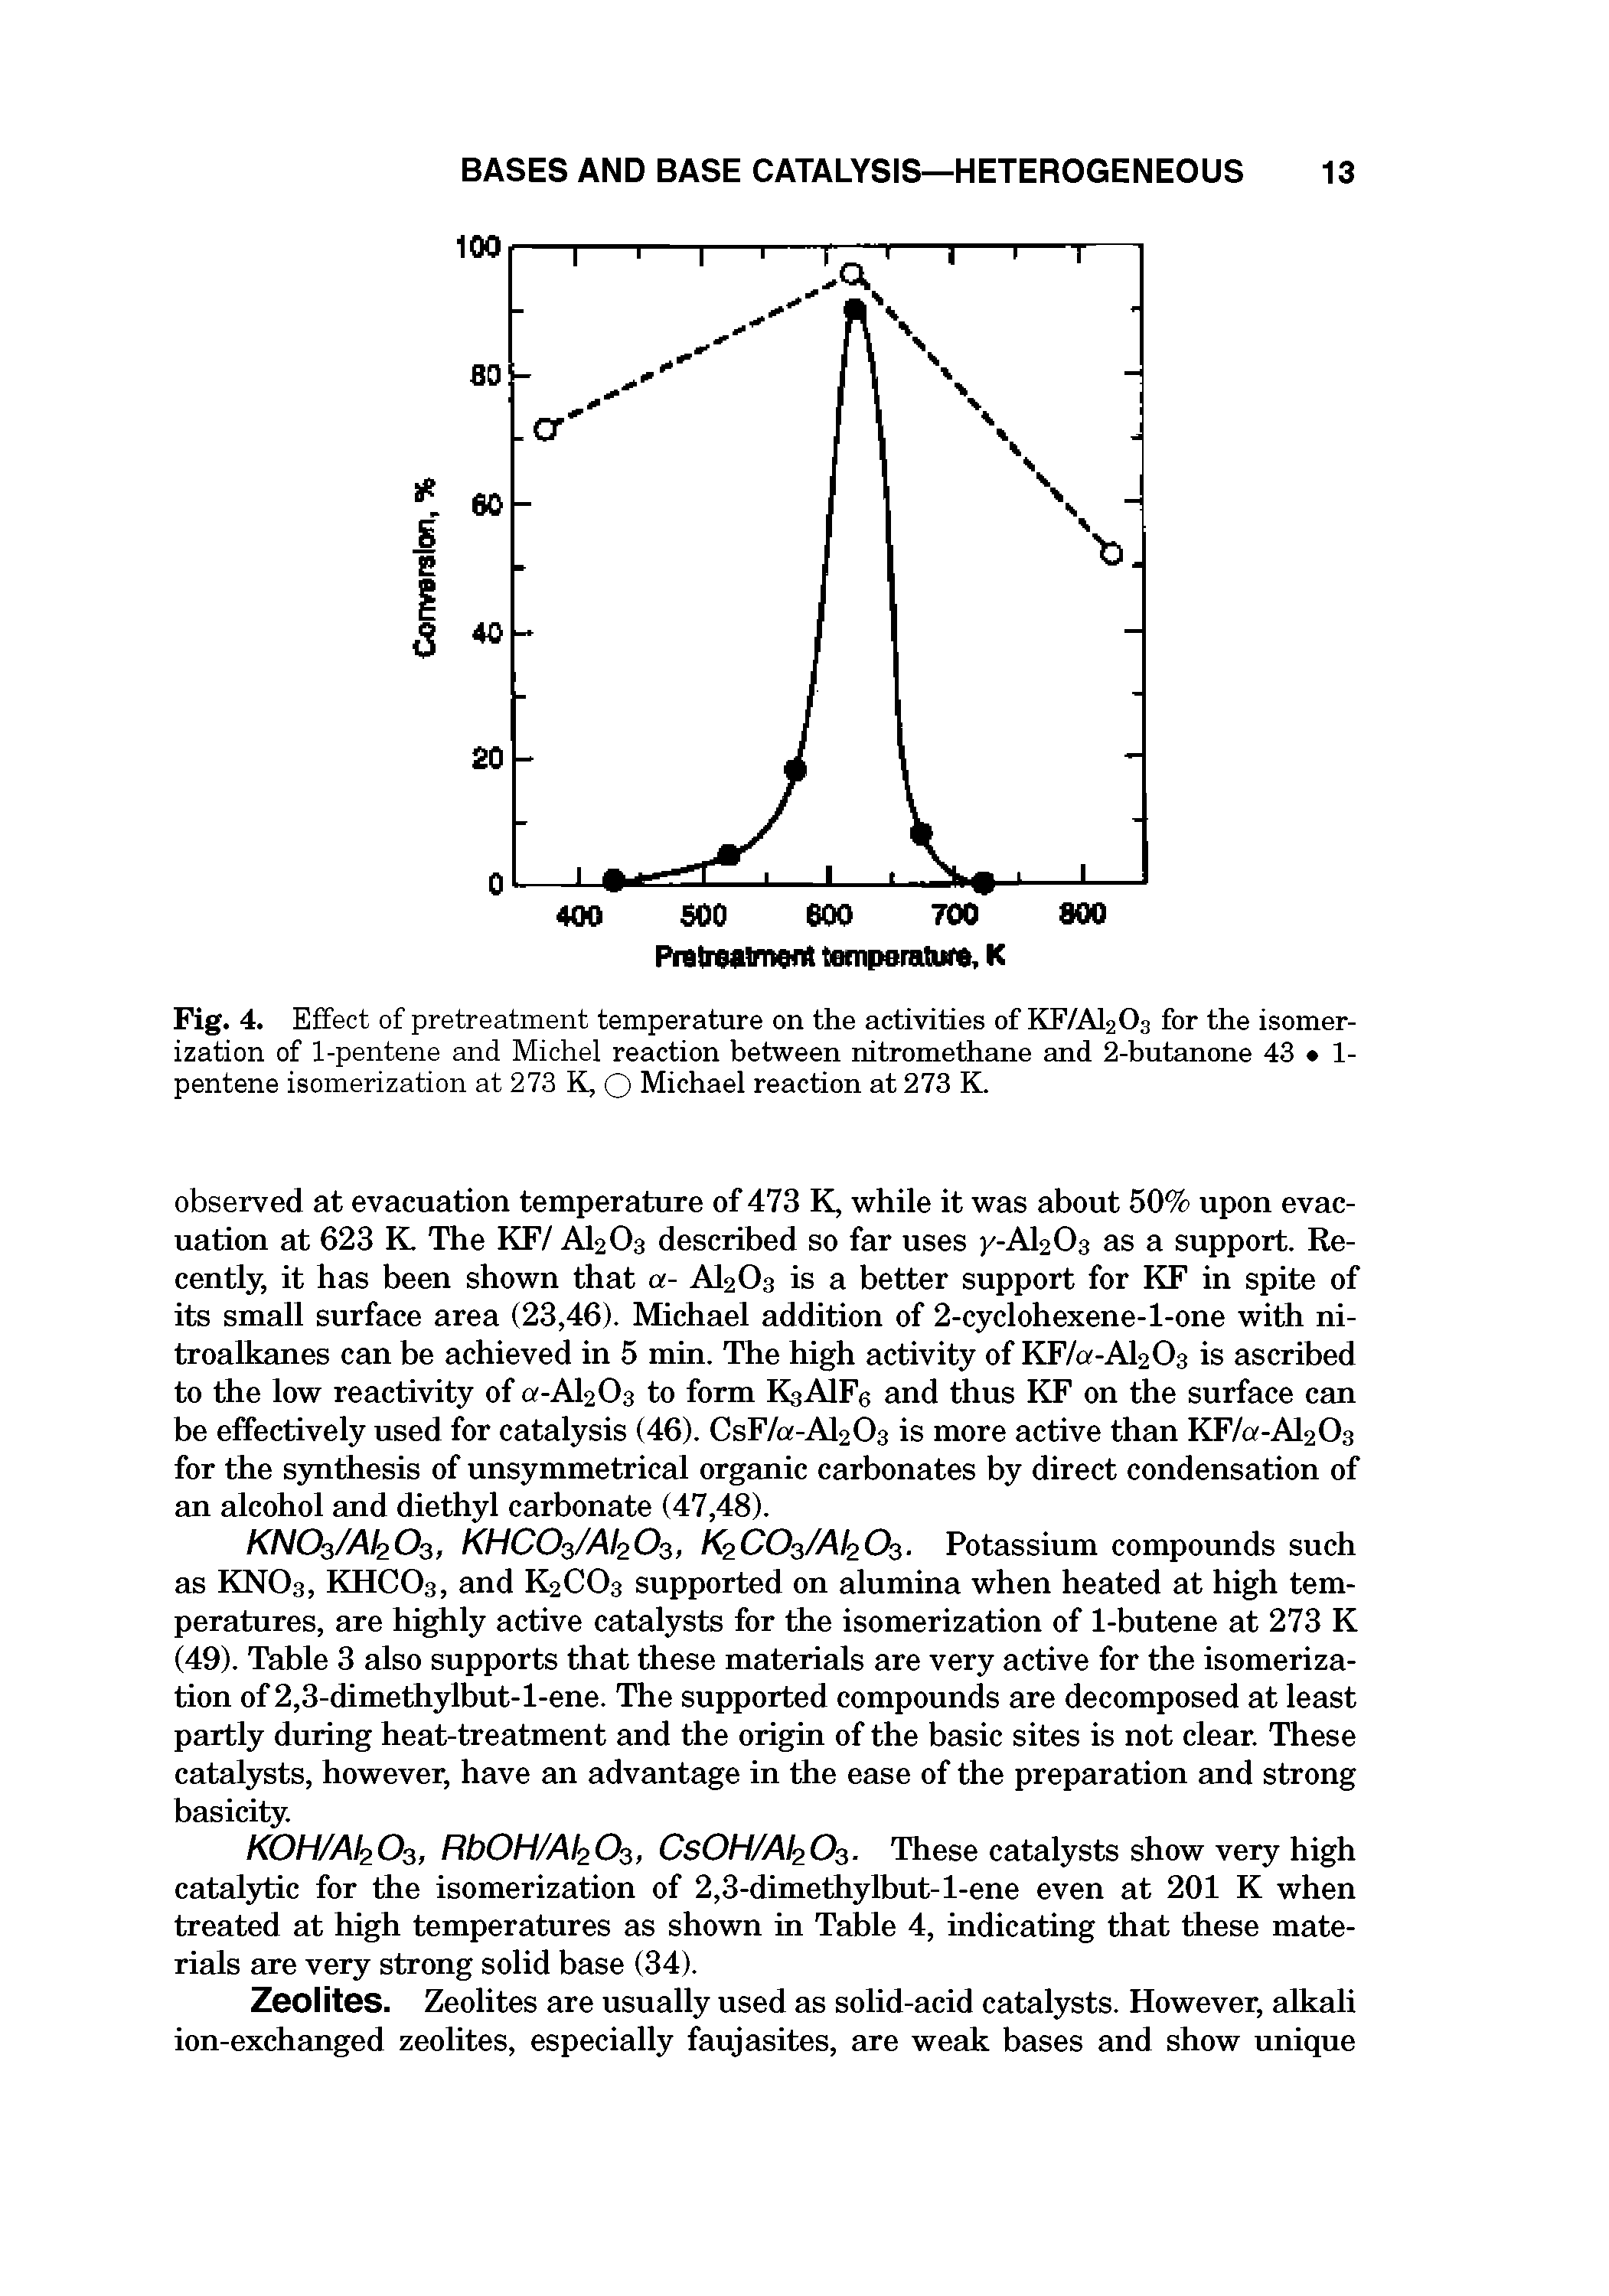 Fig. 4. Effect of pretreatment temperature on the activities of KF/AI2O3 for the isomerization of 1-pentene and Michel reaction between nitromethane and 2-hutanone 43 1-pentene isomerization at 273 K, Q Michael reaction at 273 K.